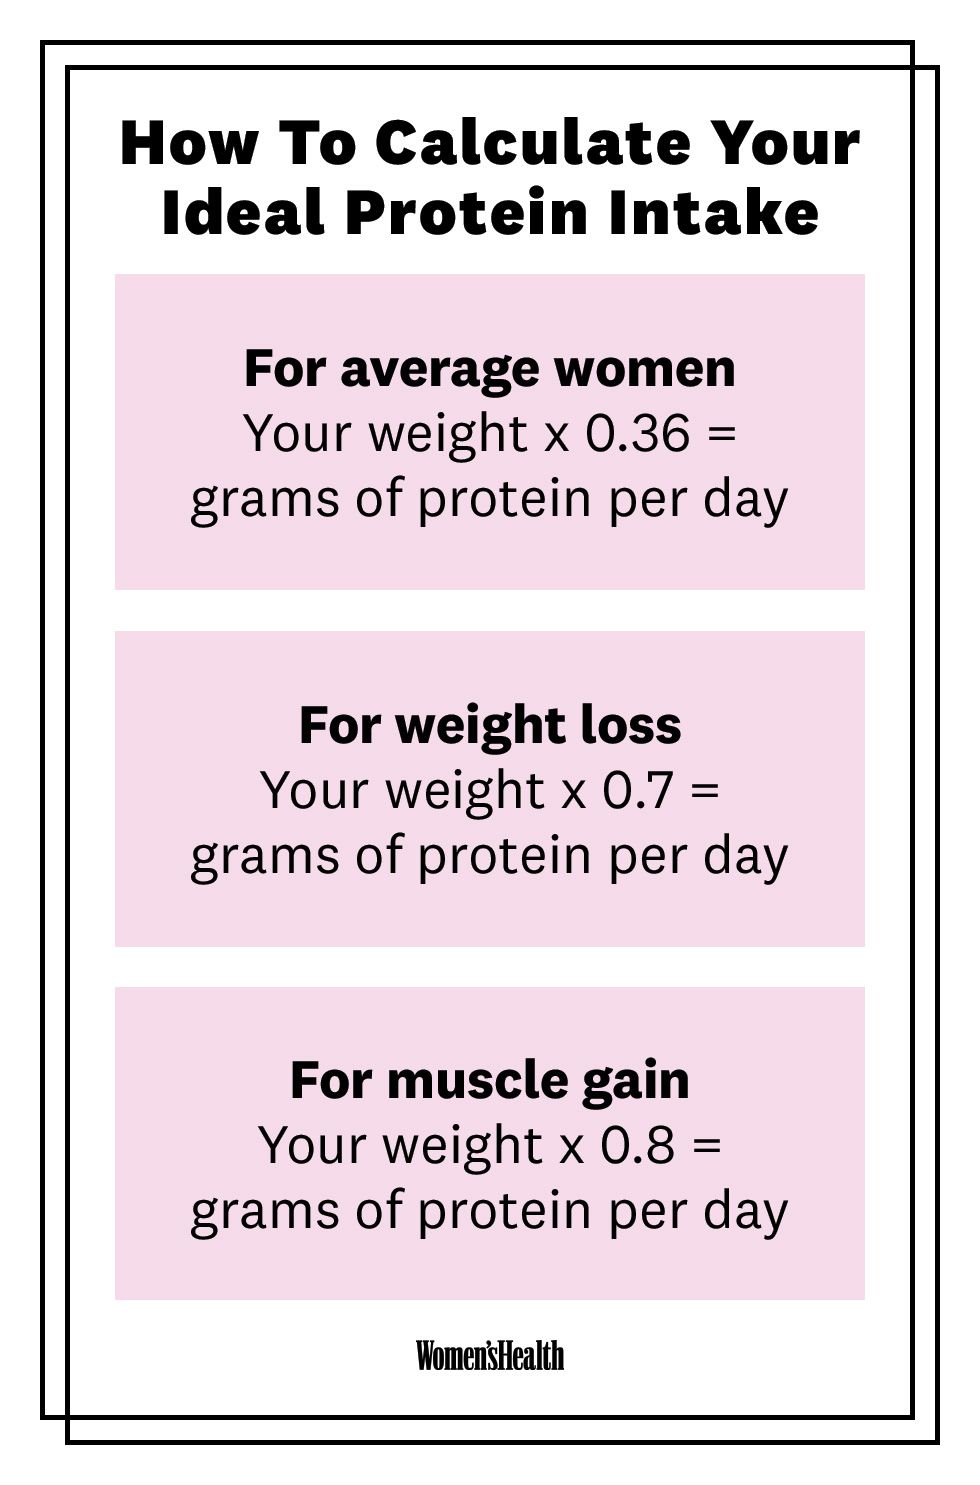 Protein intake for women